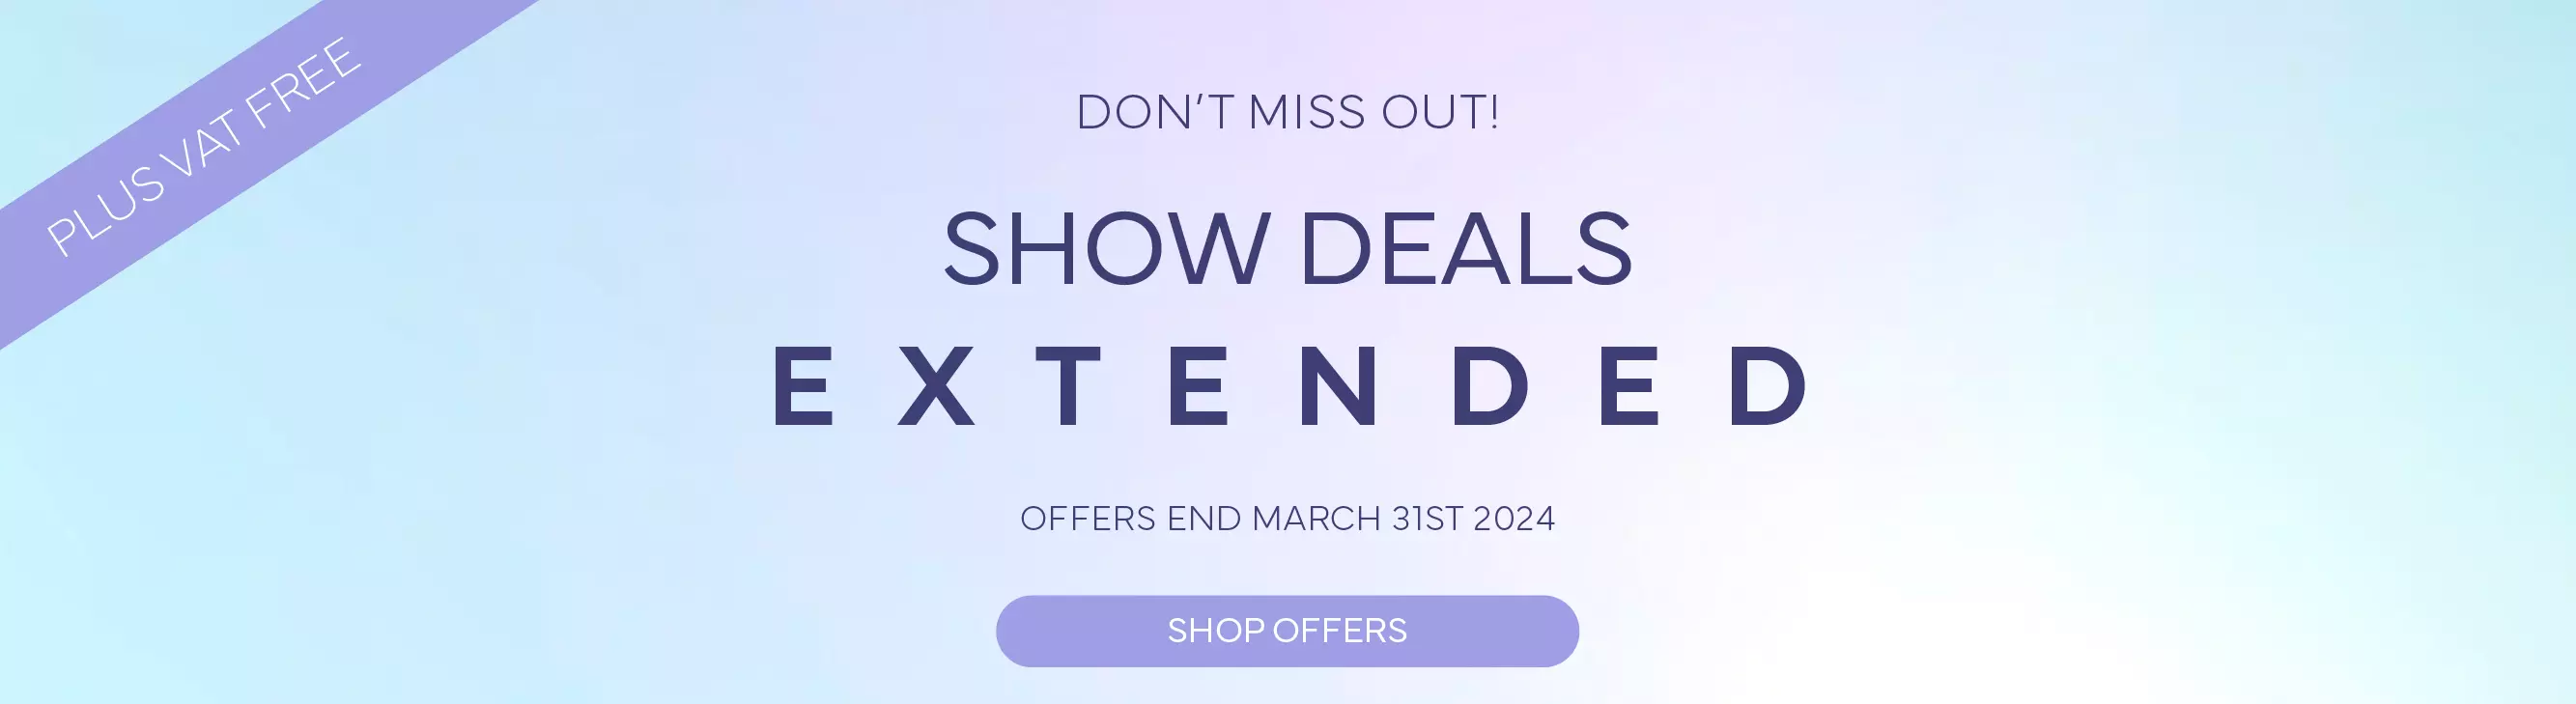 Show Deals Extended (1).png